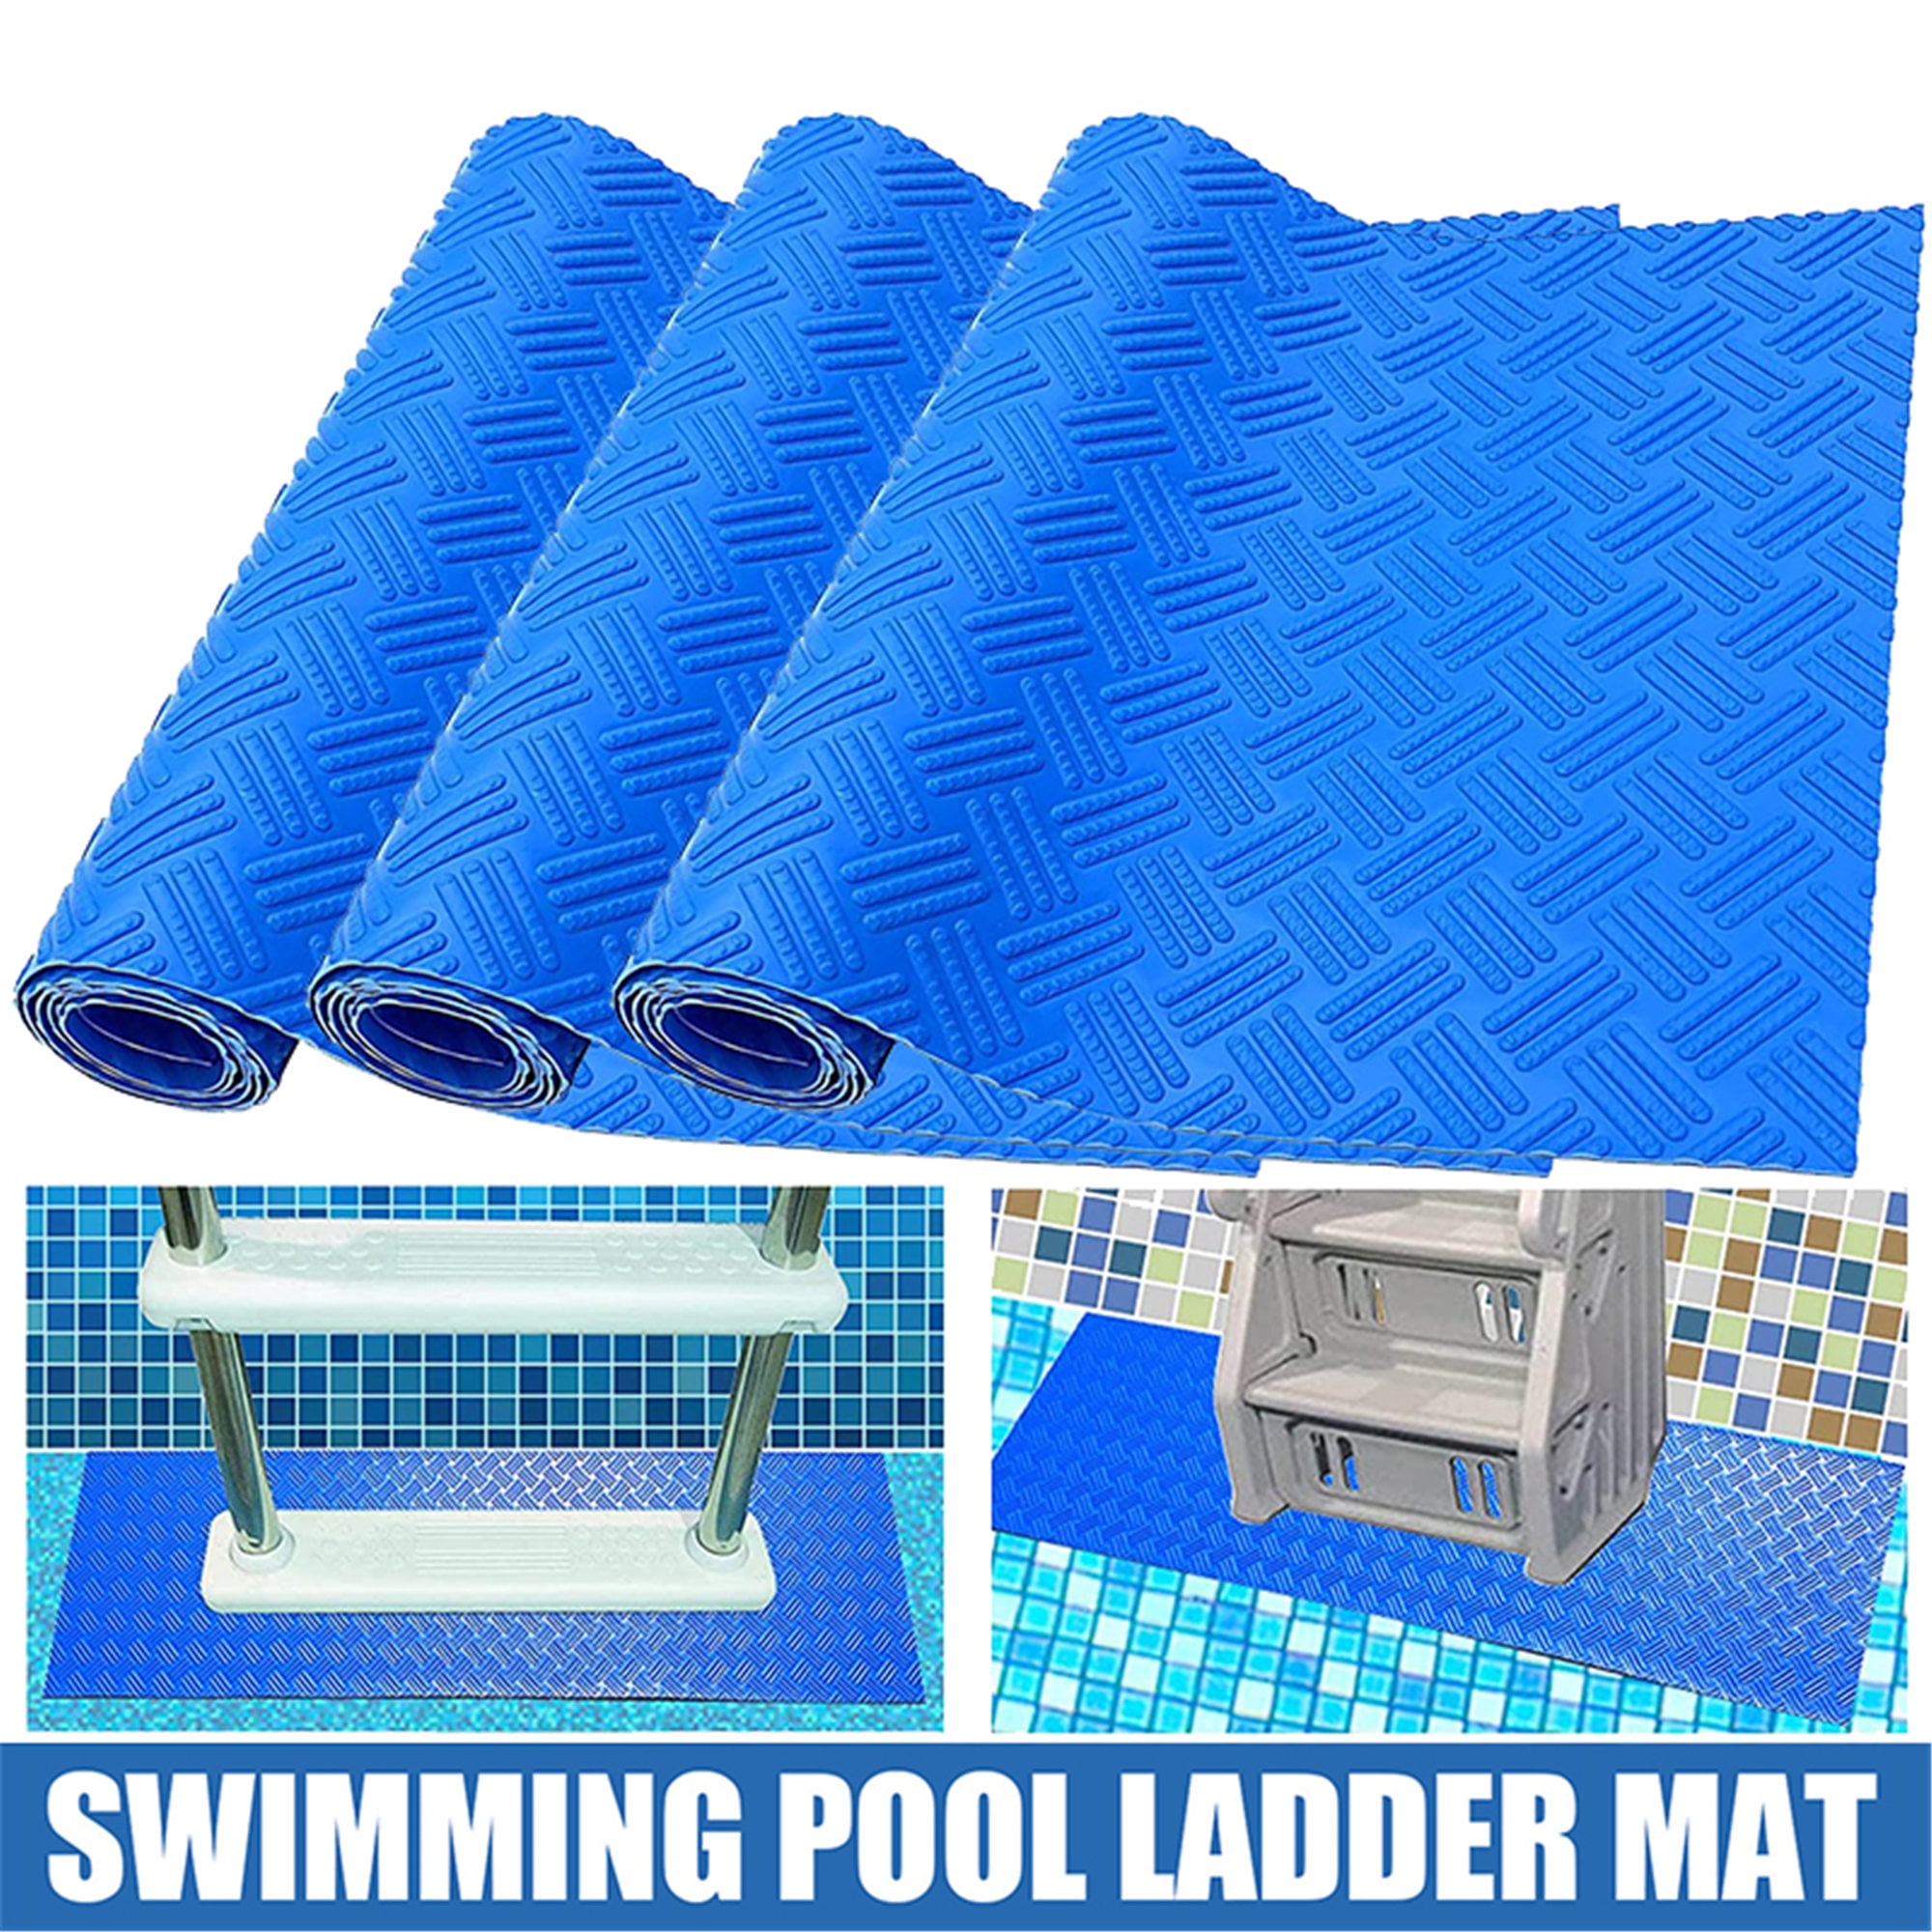 Protective Pool Ladder Pad Step Mat with Non-Slip Texture 2 Rolls Swimming Pool Ladder Mat Blue Medium 36 inch X 9 inch 